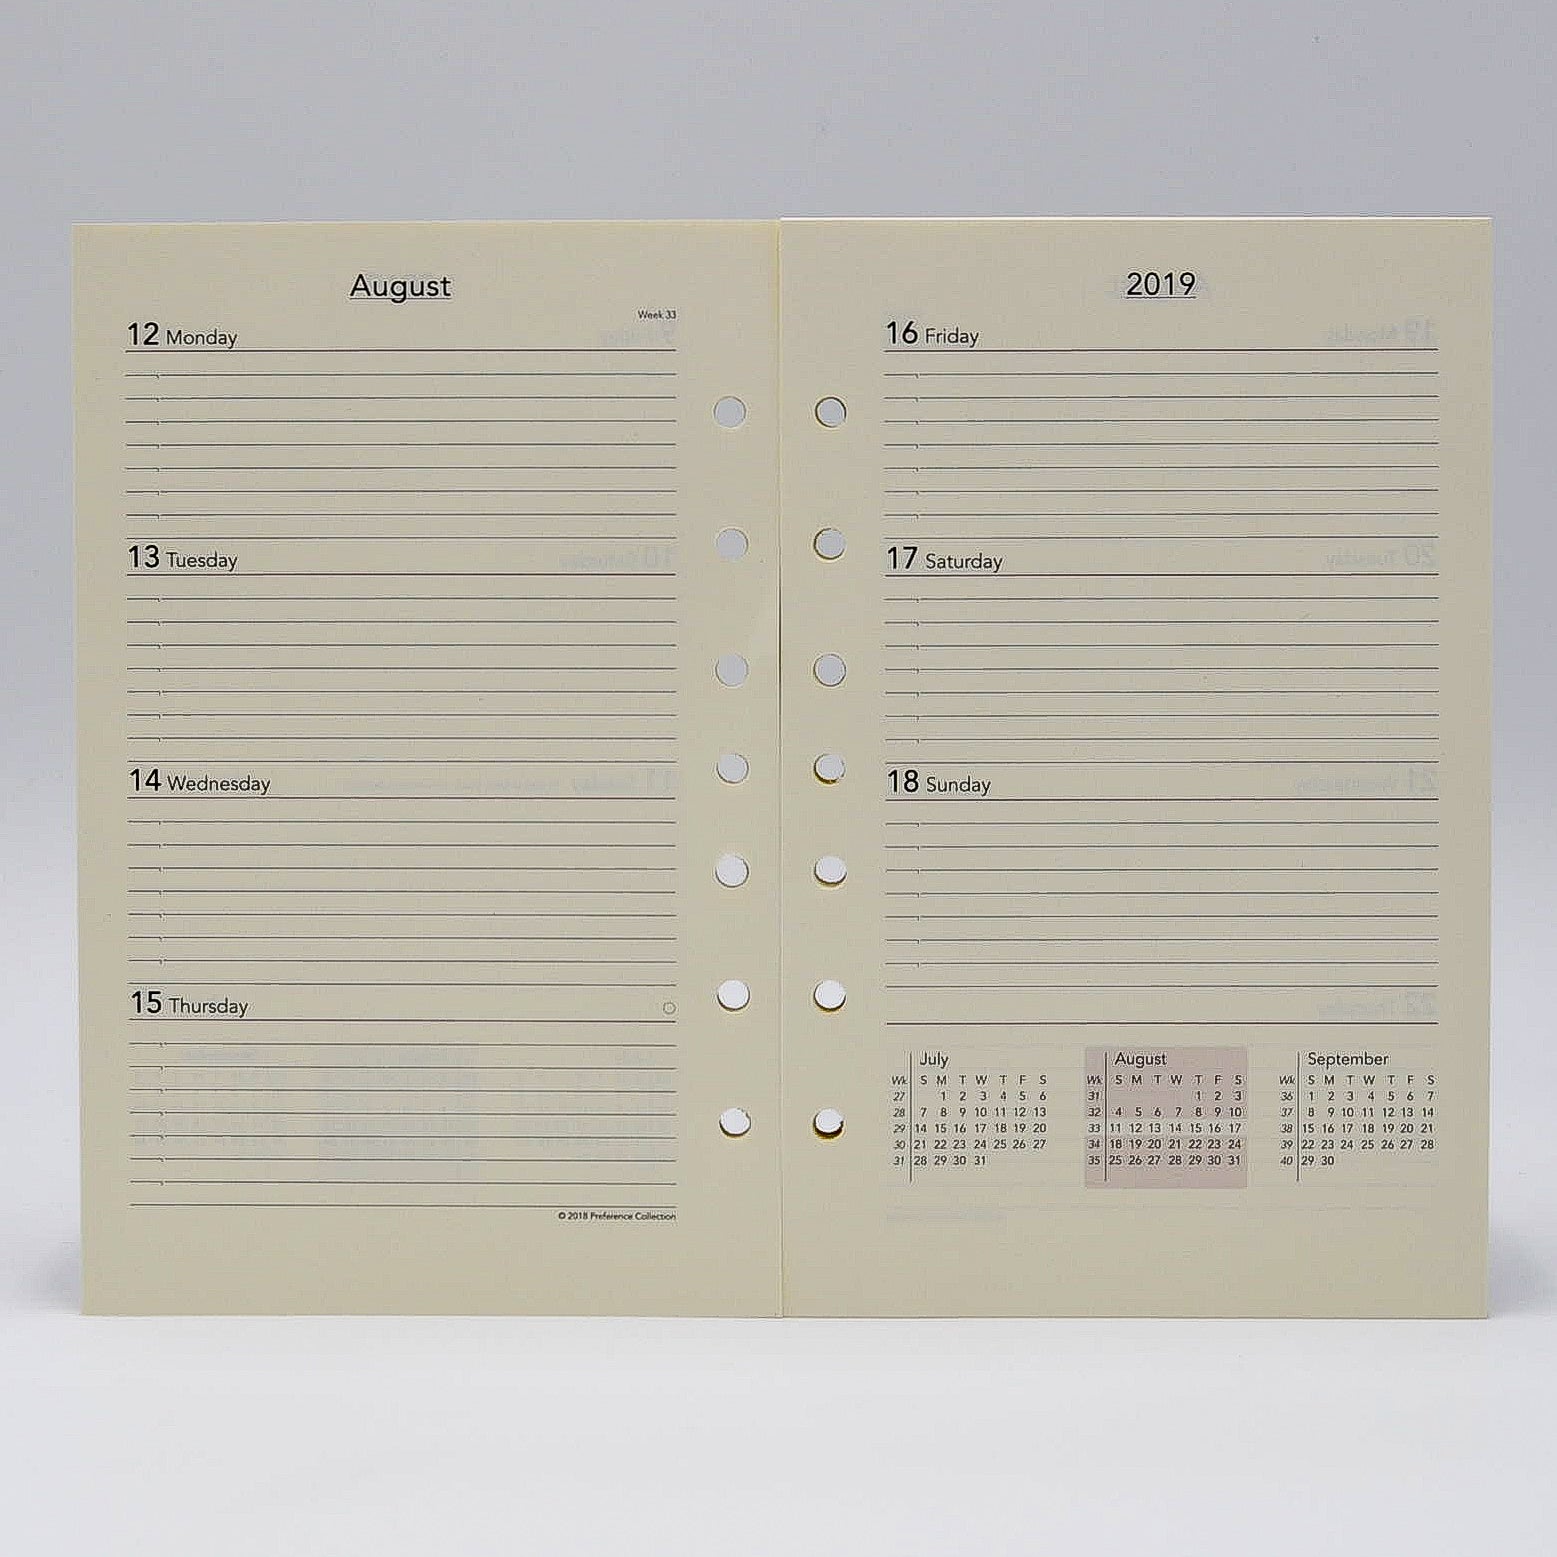 Preference Collection: PD827I 8-1/2 x 5-1/2 7-hole Planner monthly weekly calendar for 2019 or 2020 ivory loose leaf